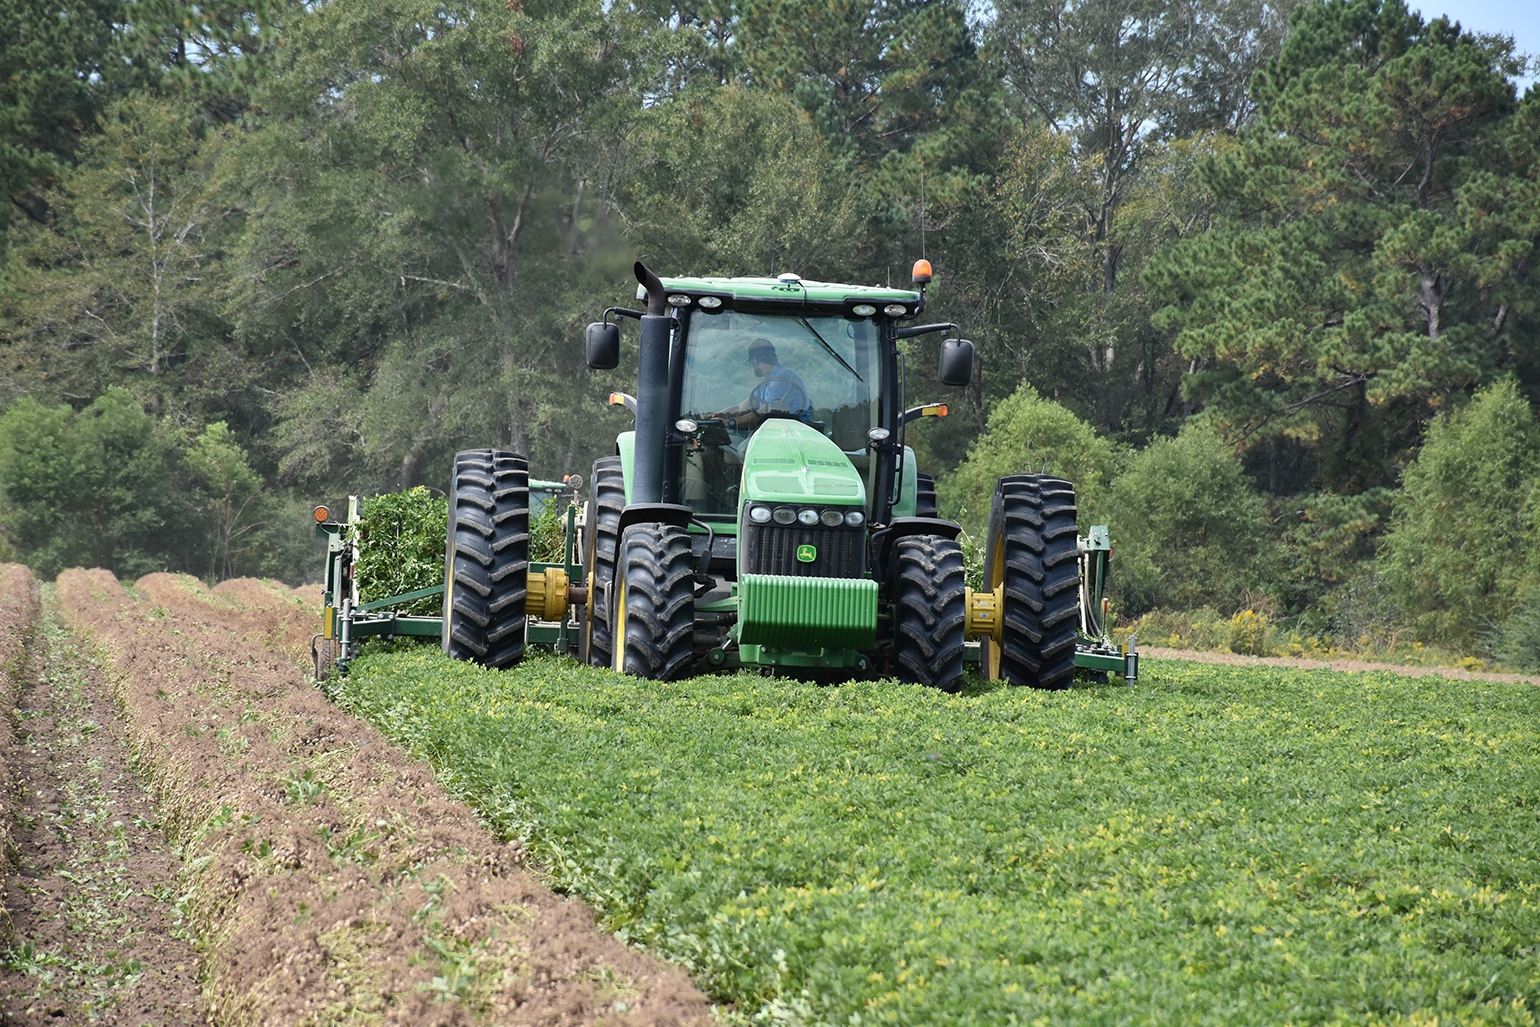 Peanut planting tips for Midsouth farmers